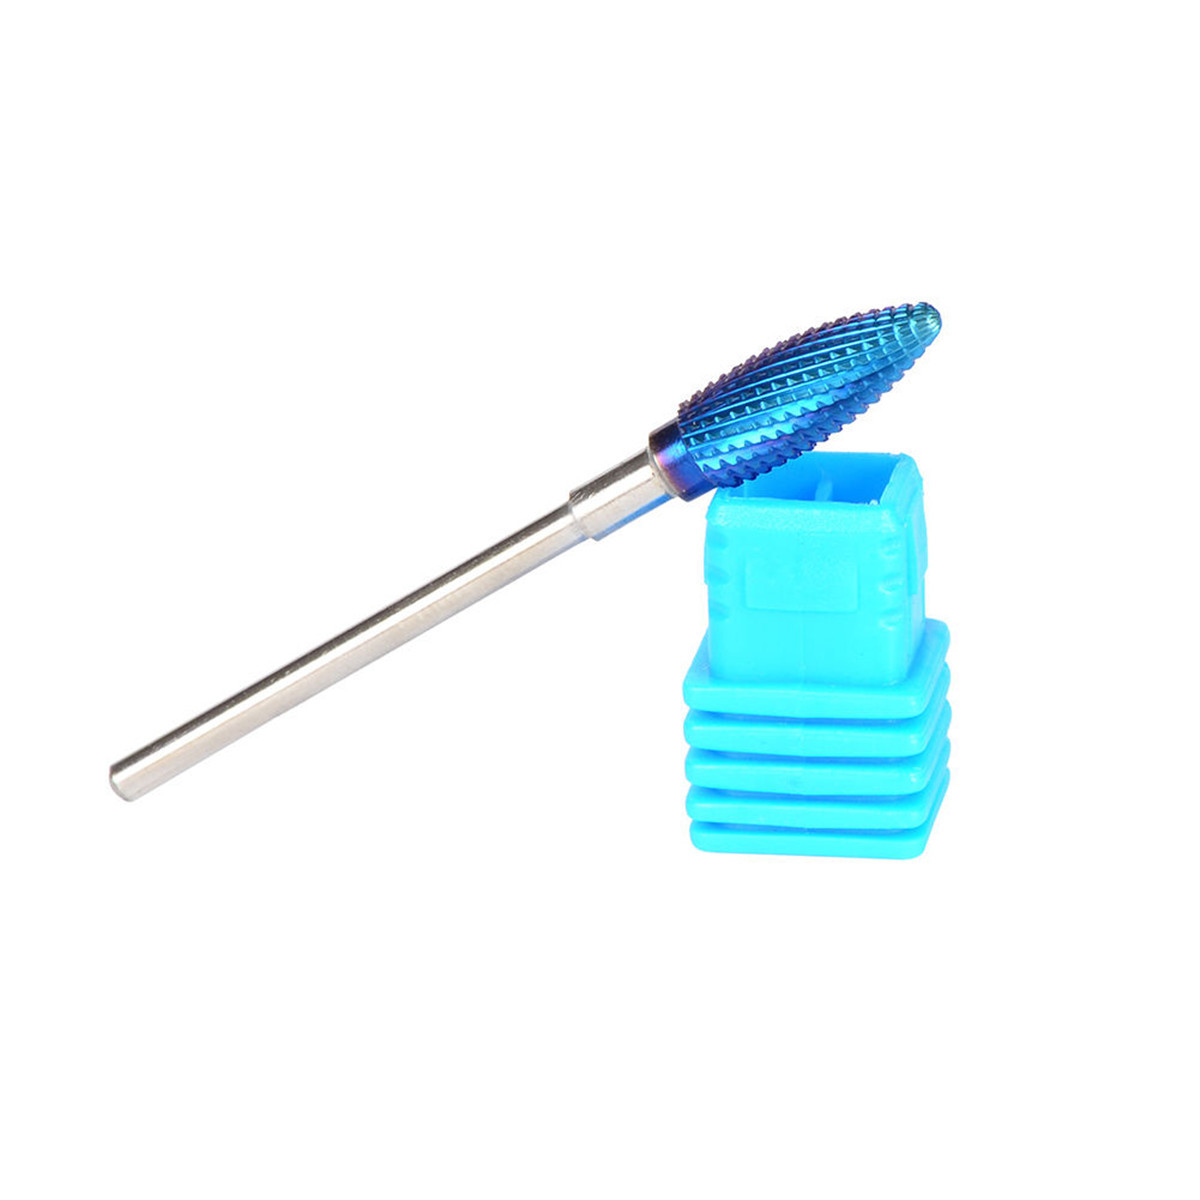 Pro-Electric-Blue-Cylinder-Coated-Carbide-File-Drill-Bit-Nail-Art-Manicure-Pedicure-Kit-1126688